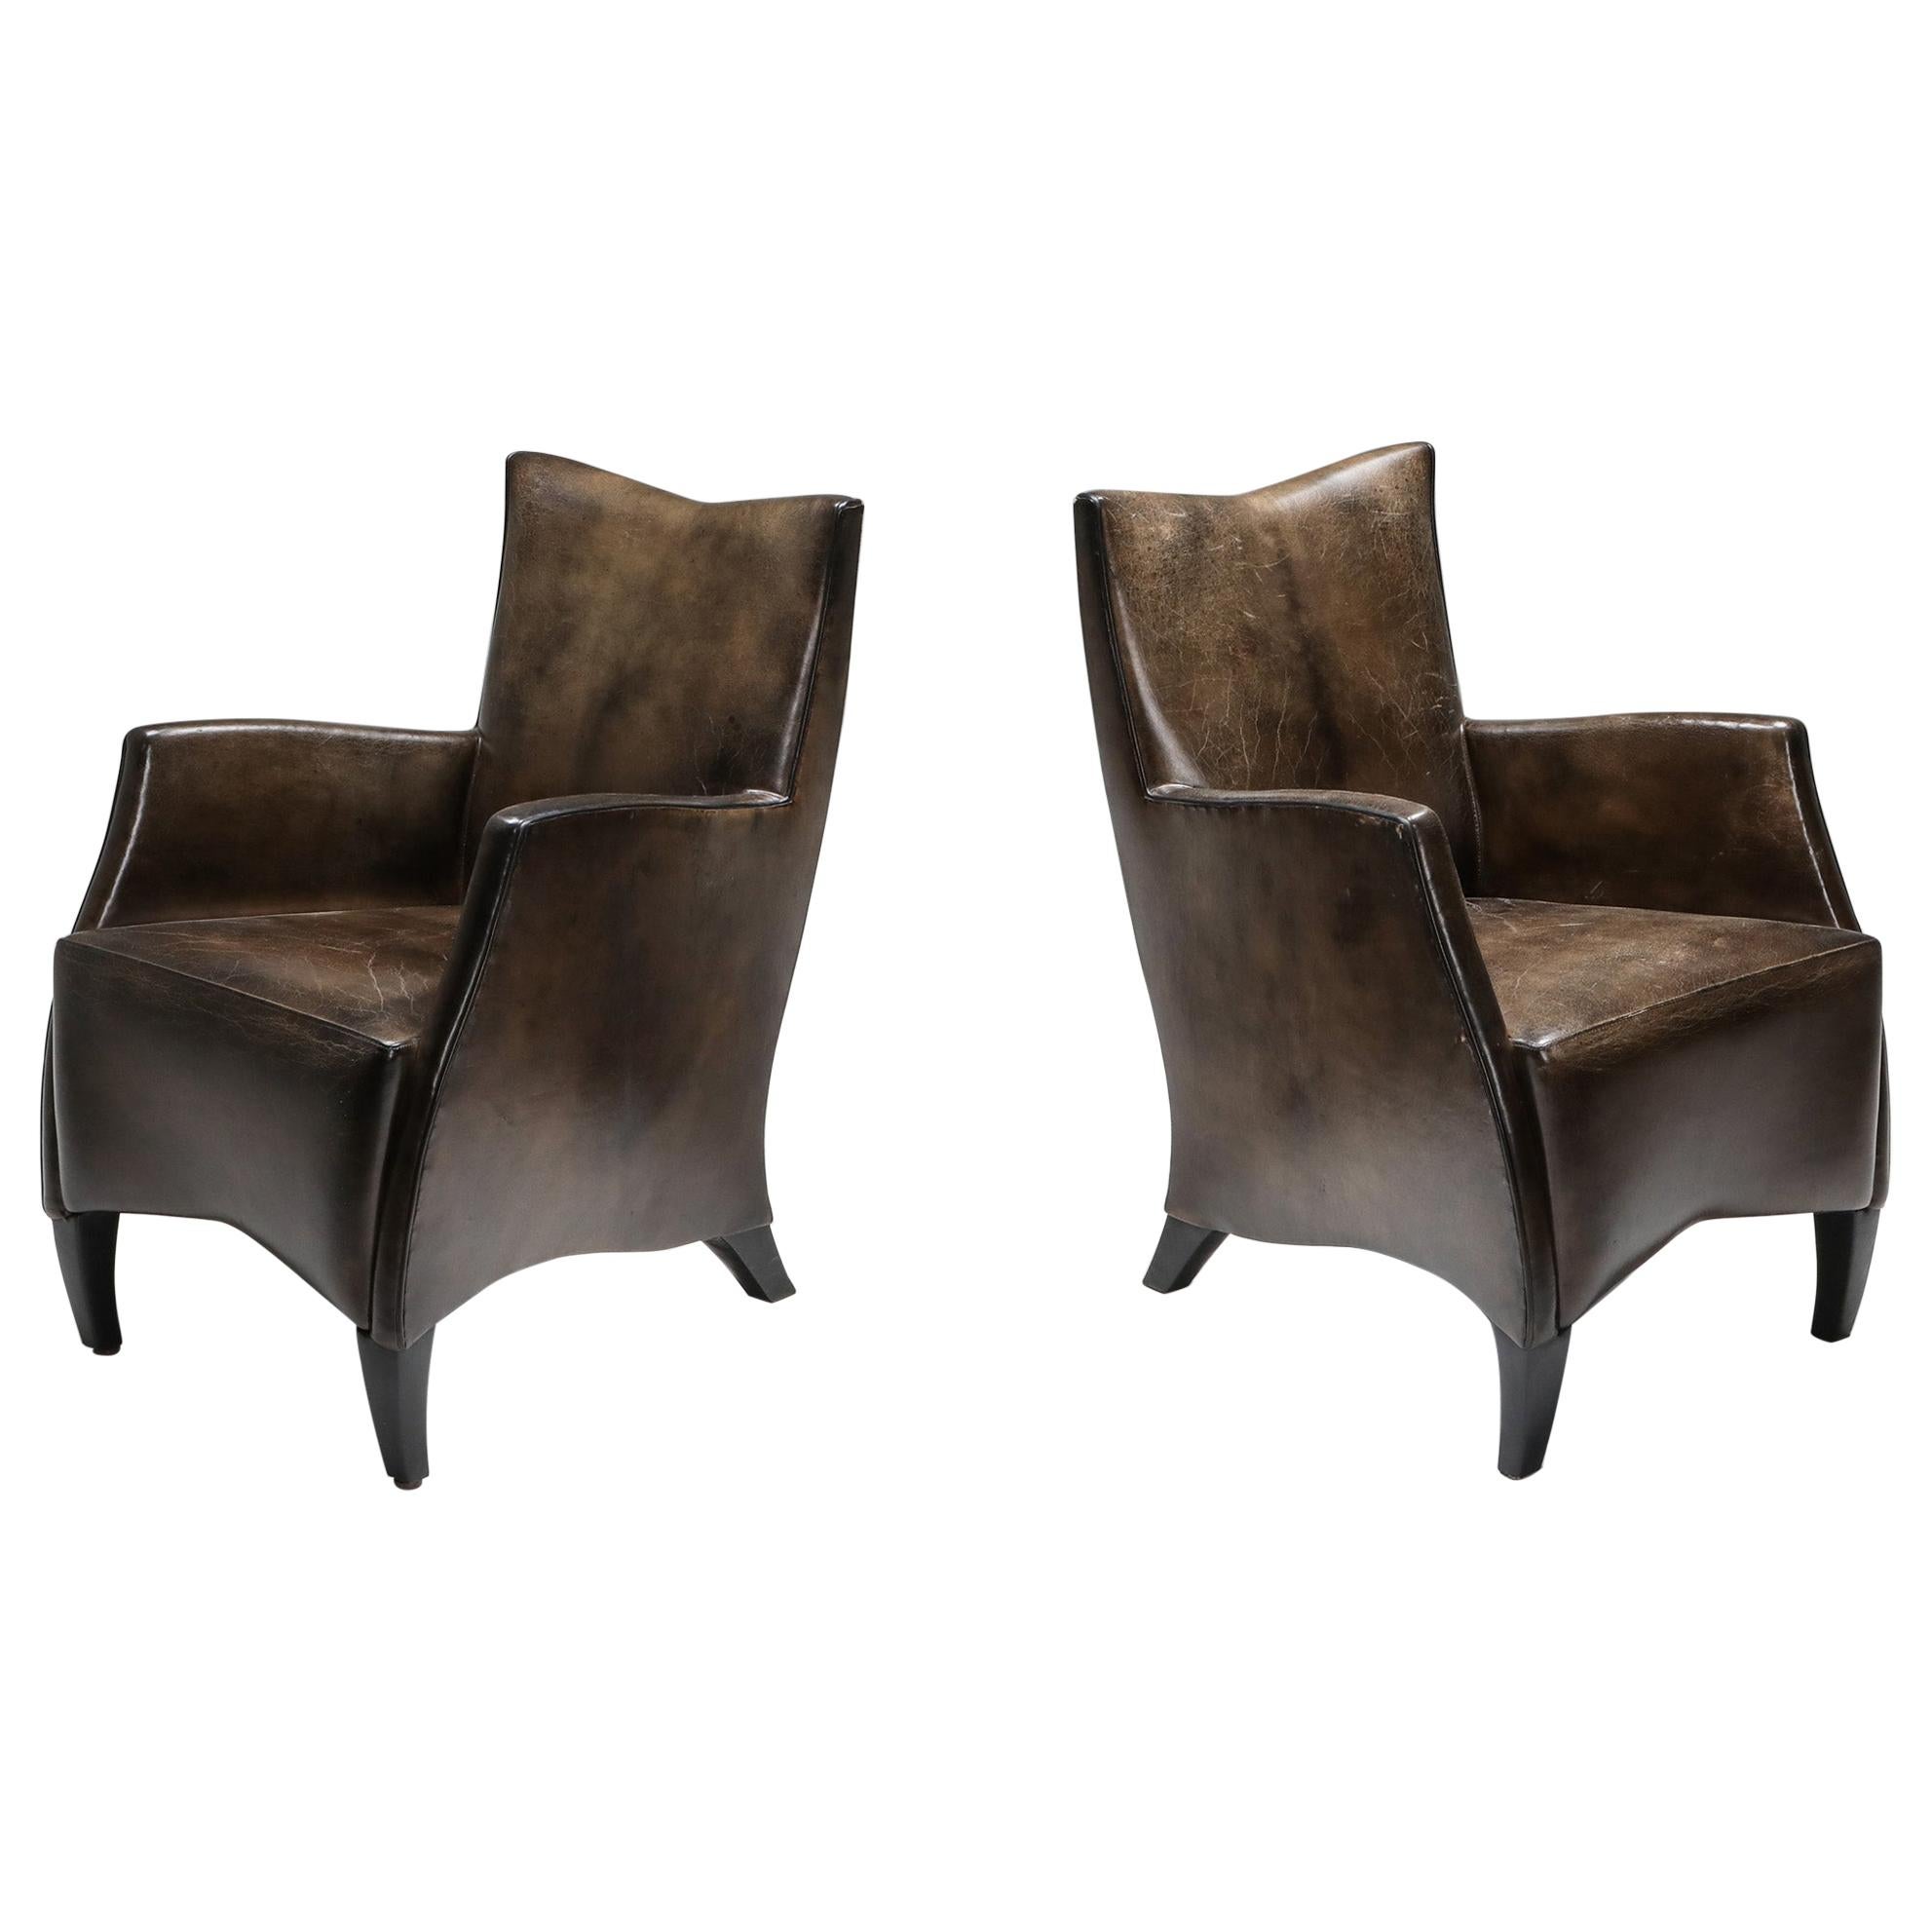 Leather Art Deco Style Armchairs in Brown Grey Patina